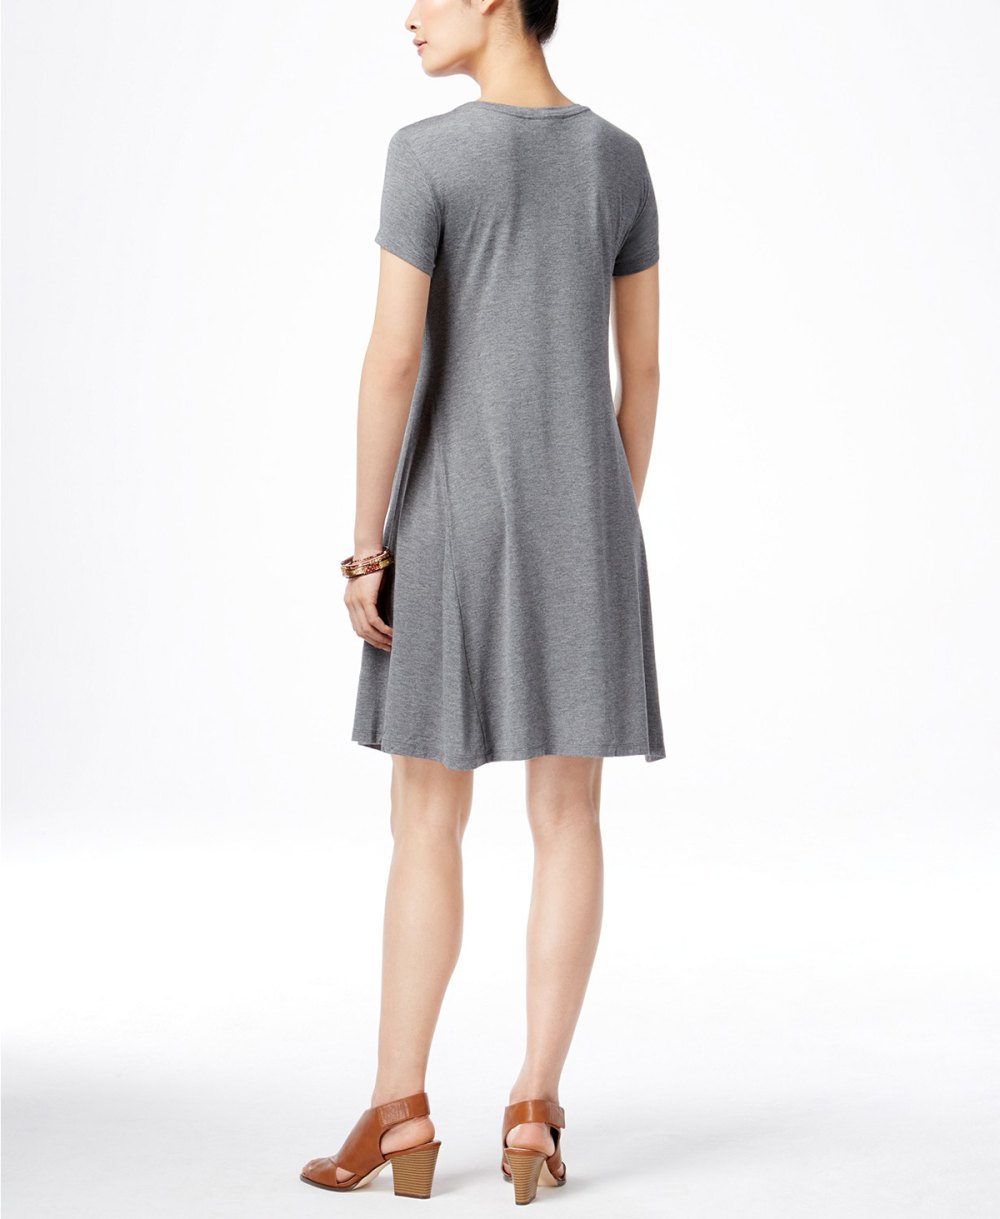 This Easy Summer Dress With Hundreds of Reviews Is 50% Off | Us Weekly